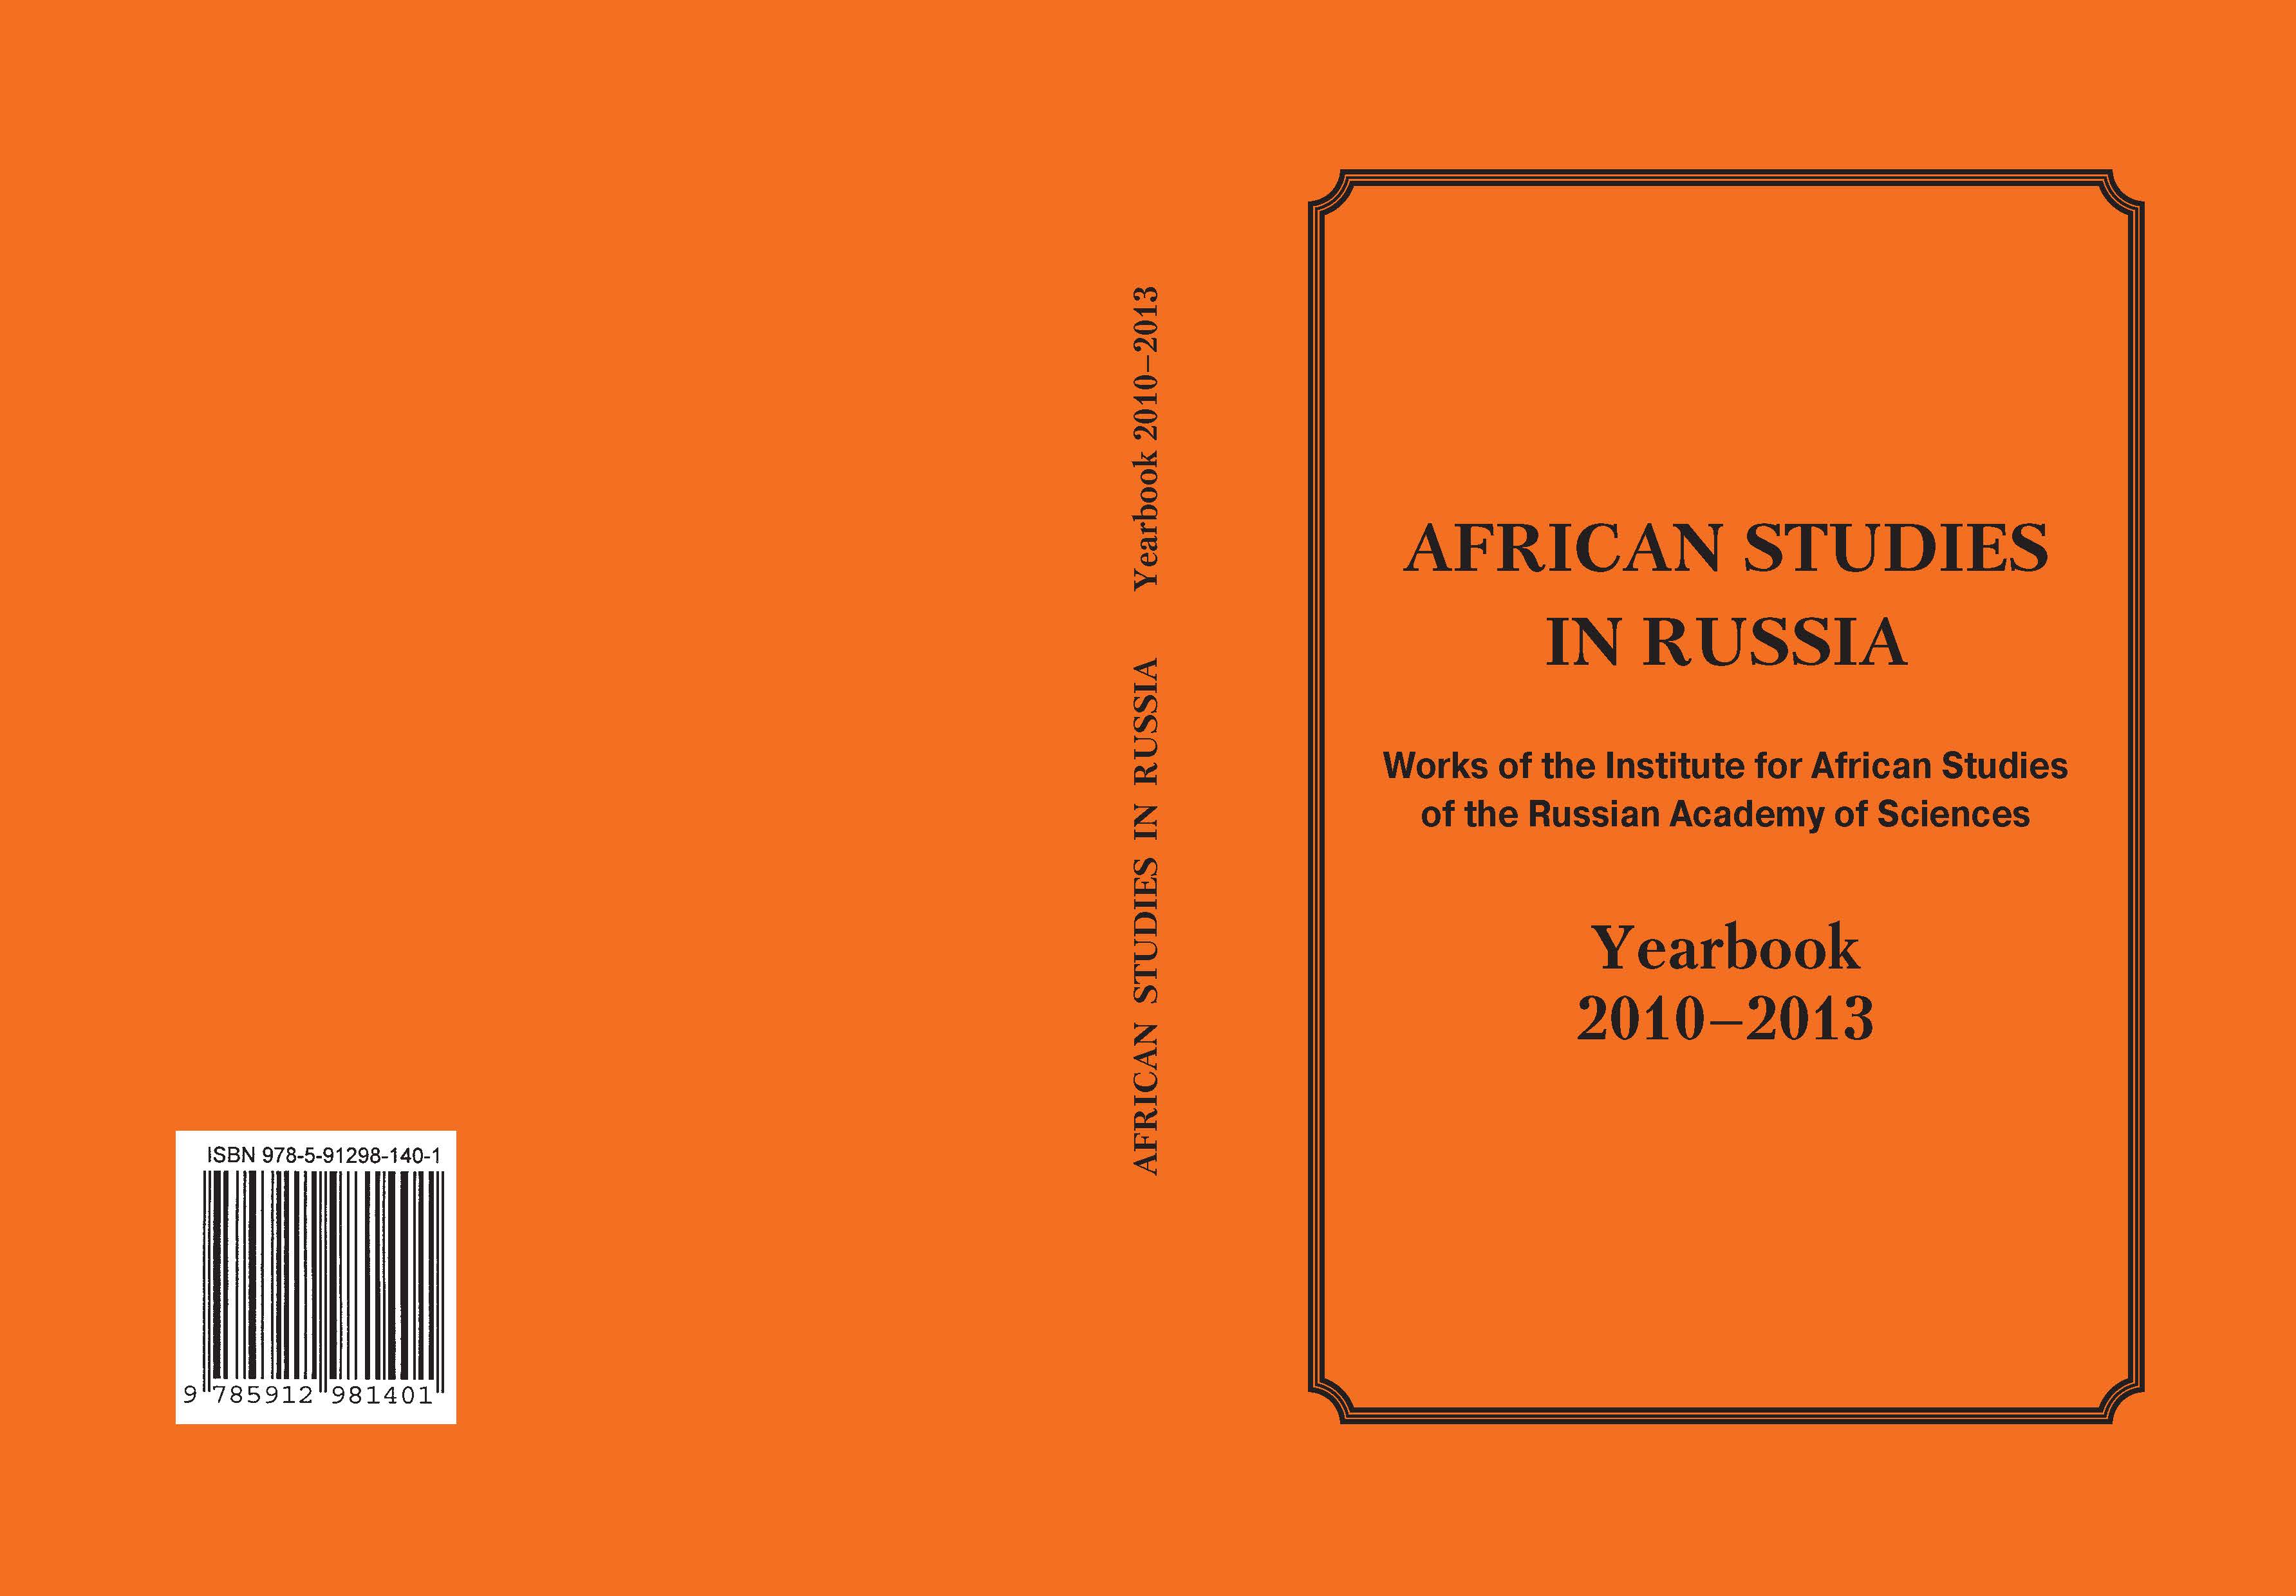 African Studies in Russia. Works of the Institute for African Studies of the Russian Academy of Sciences. Yearbook 2010–2013